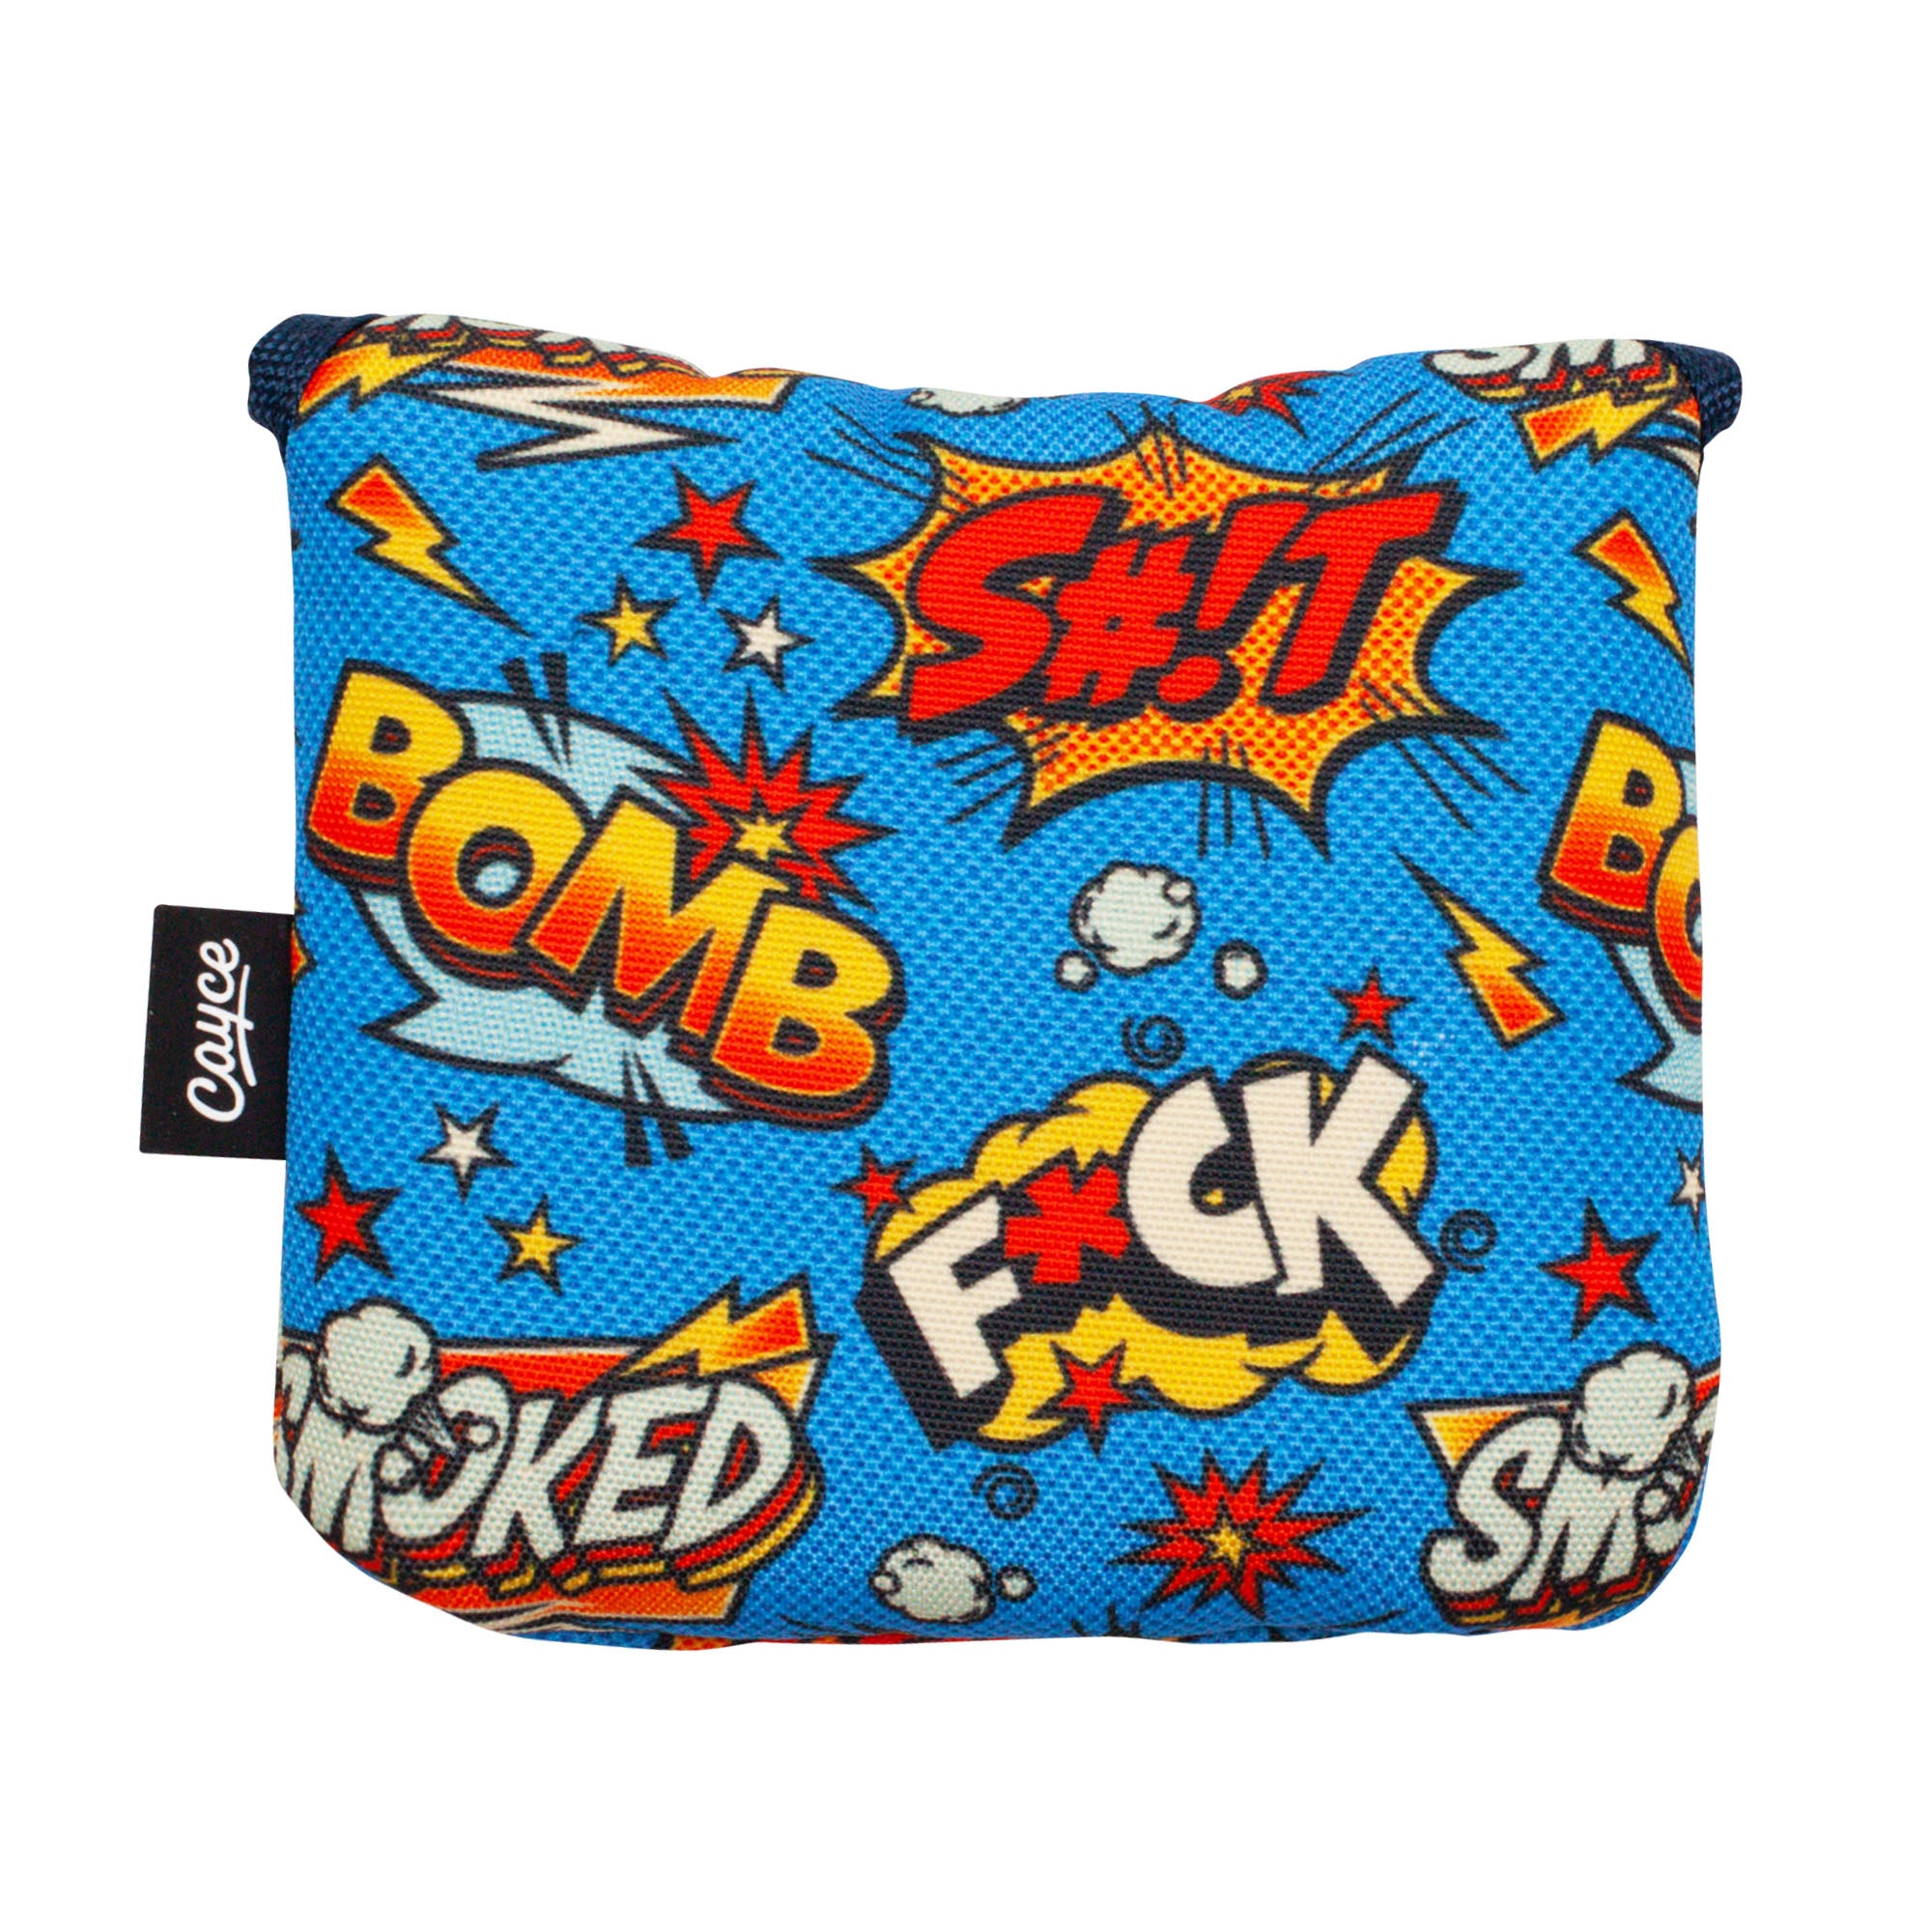 vibrant, funny sh*t, f*ck magnetic mallet putter cover from cayce golf 